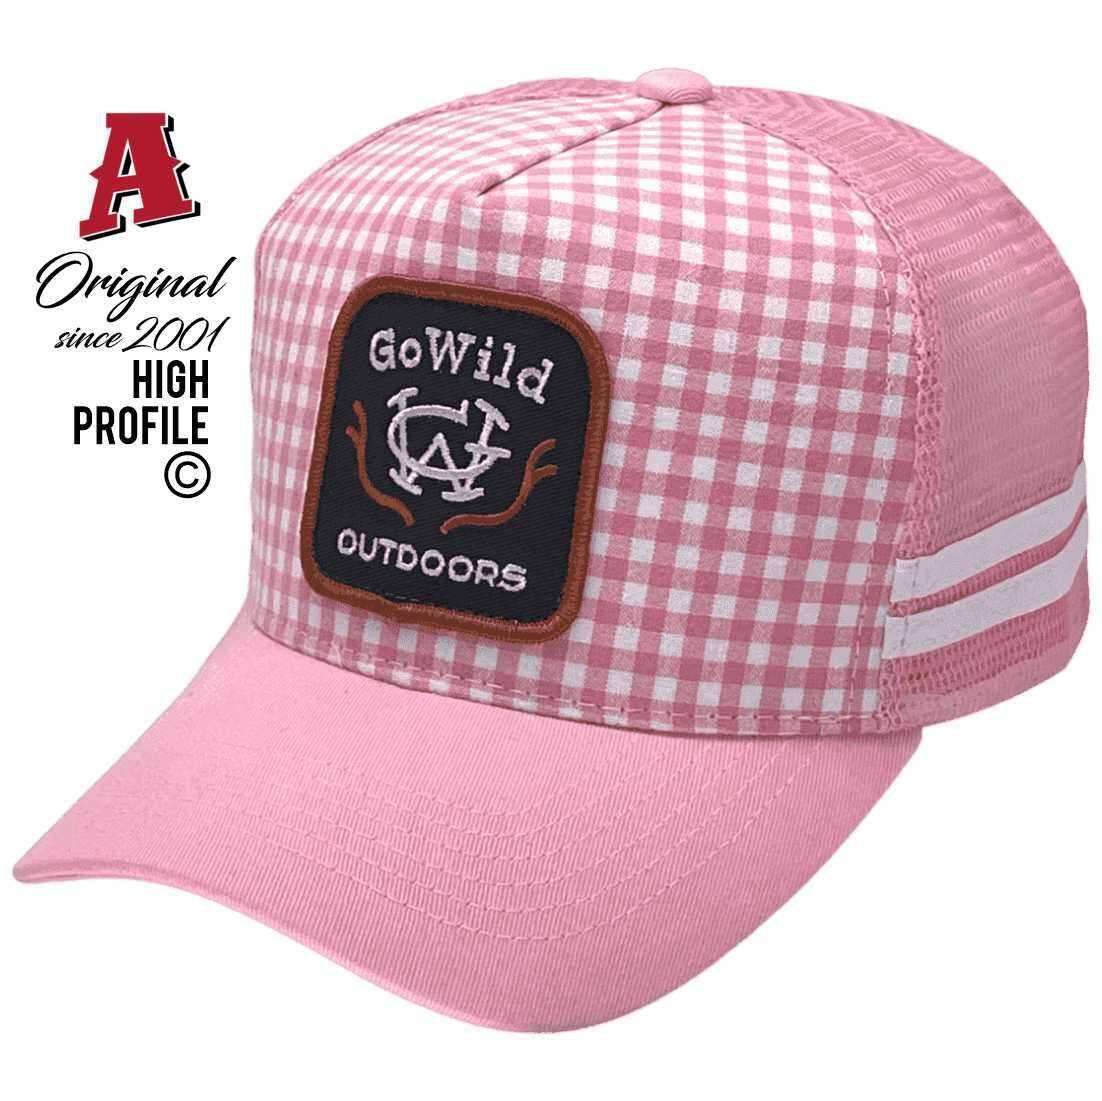 Go Wild Outdoors Charters Towers Qld Midrange Aussie Trucker Hats with Australian HeadFit Crown 2 SideBands Gingham Pink Snapback